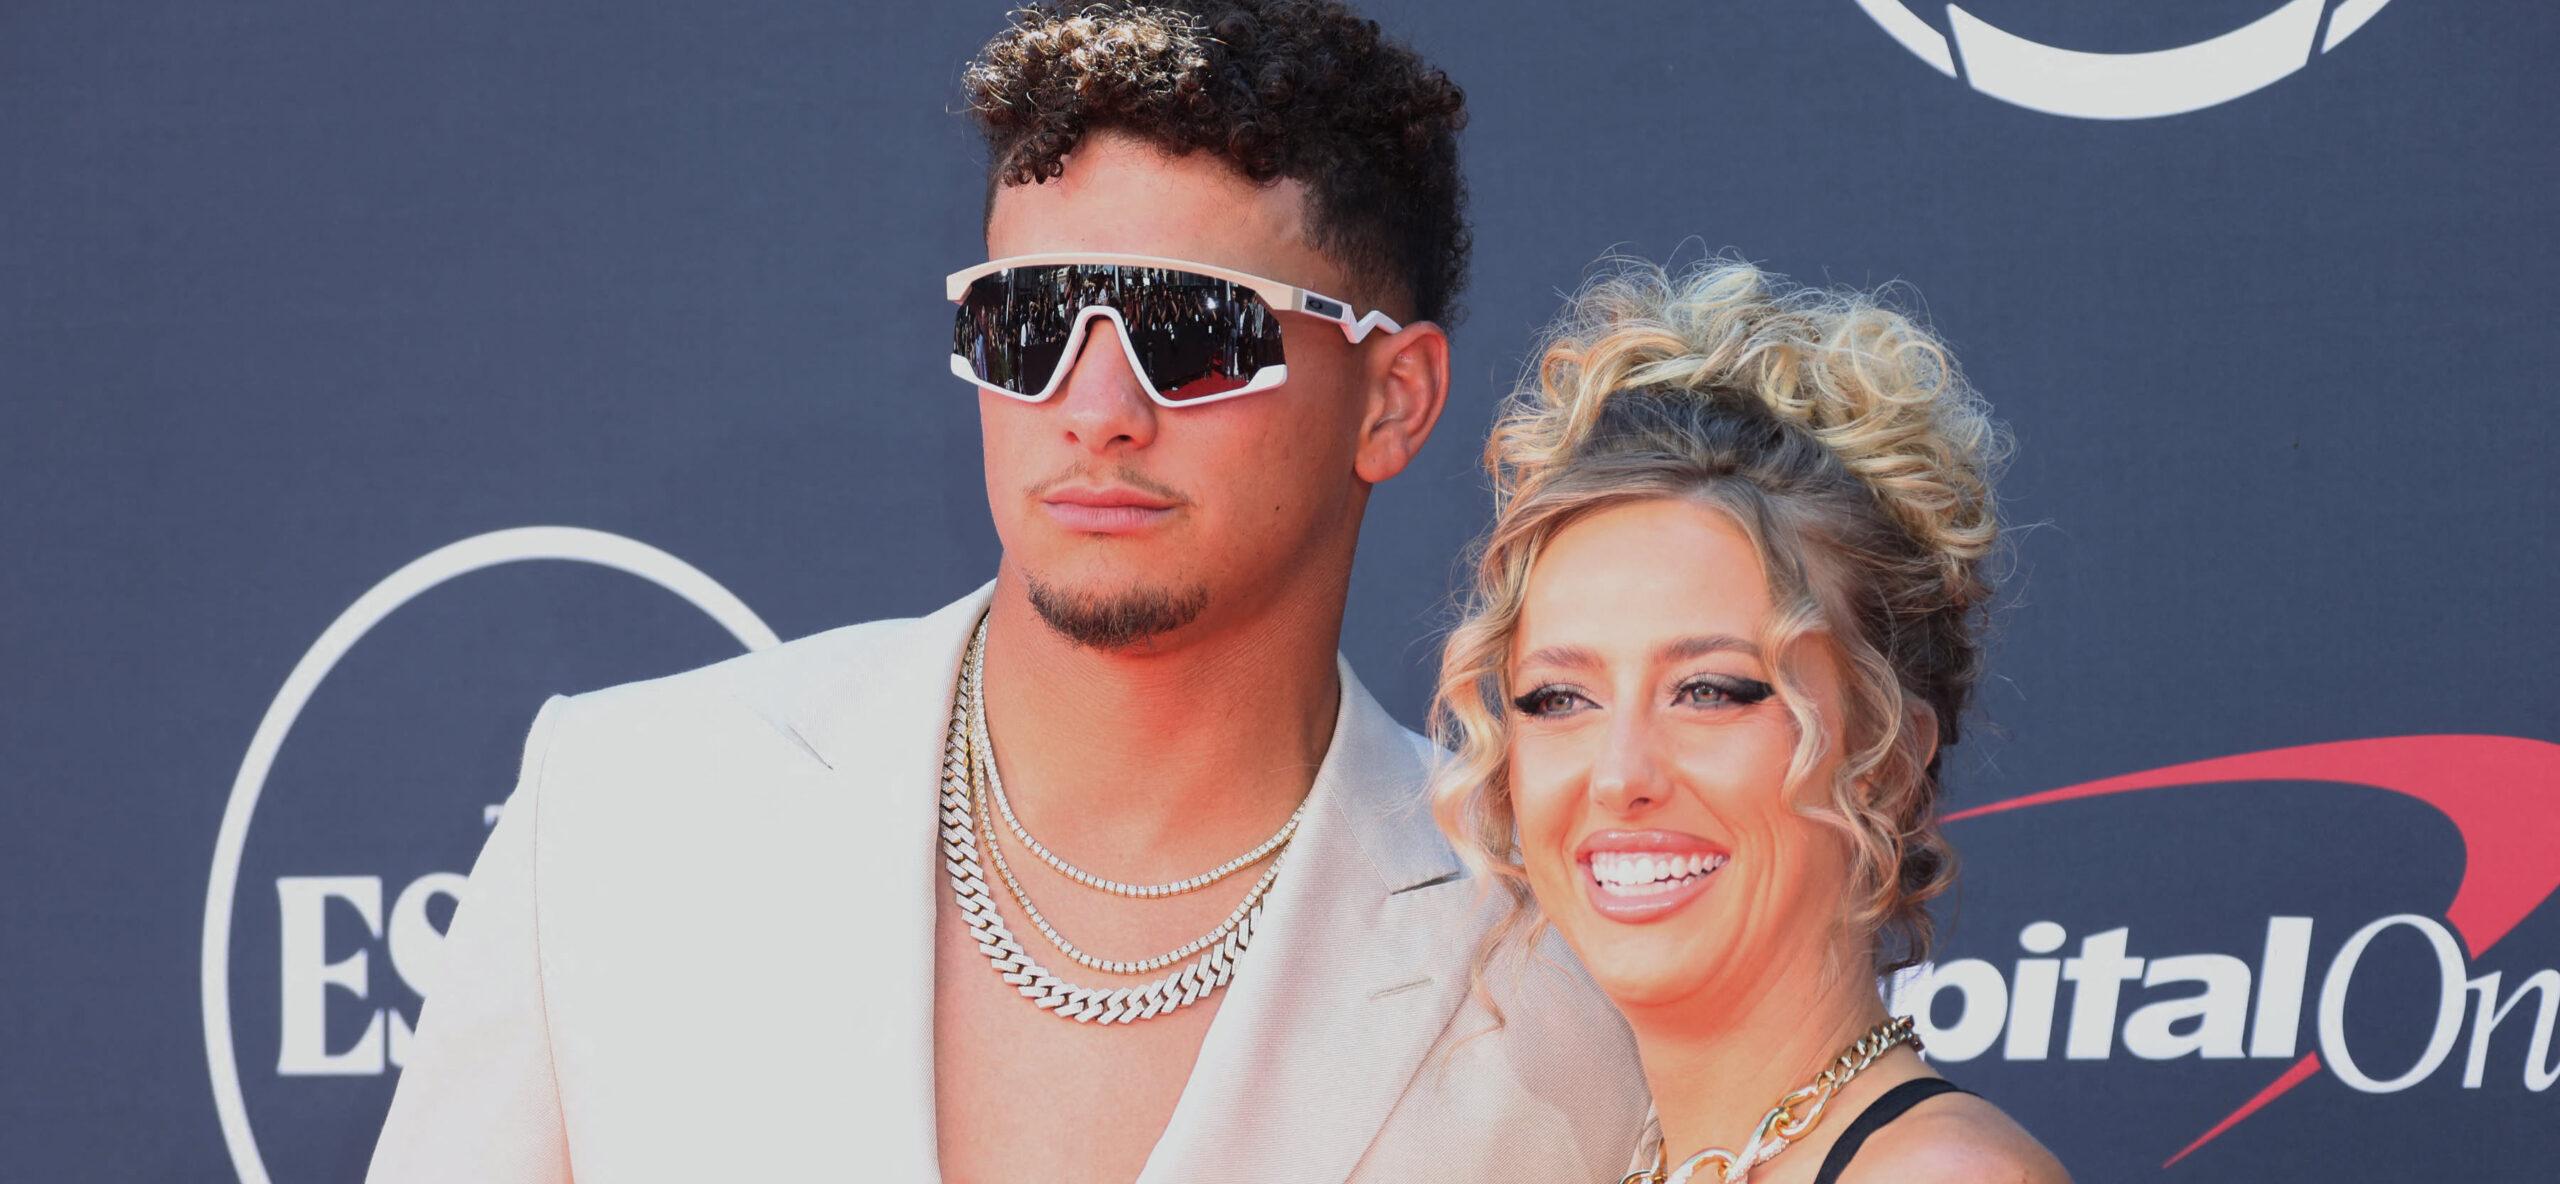 Brittany Mahomes Opens Up About Her 1-Year-Old Son’s ‘Scary’ E.R. Visit